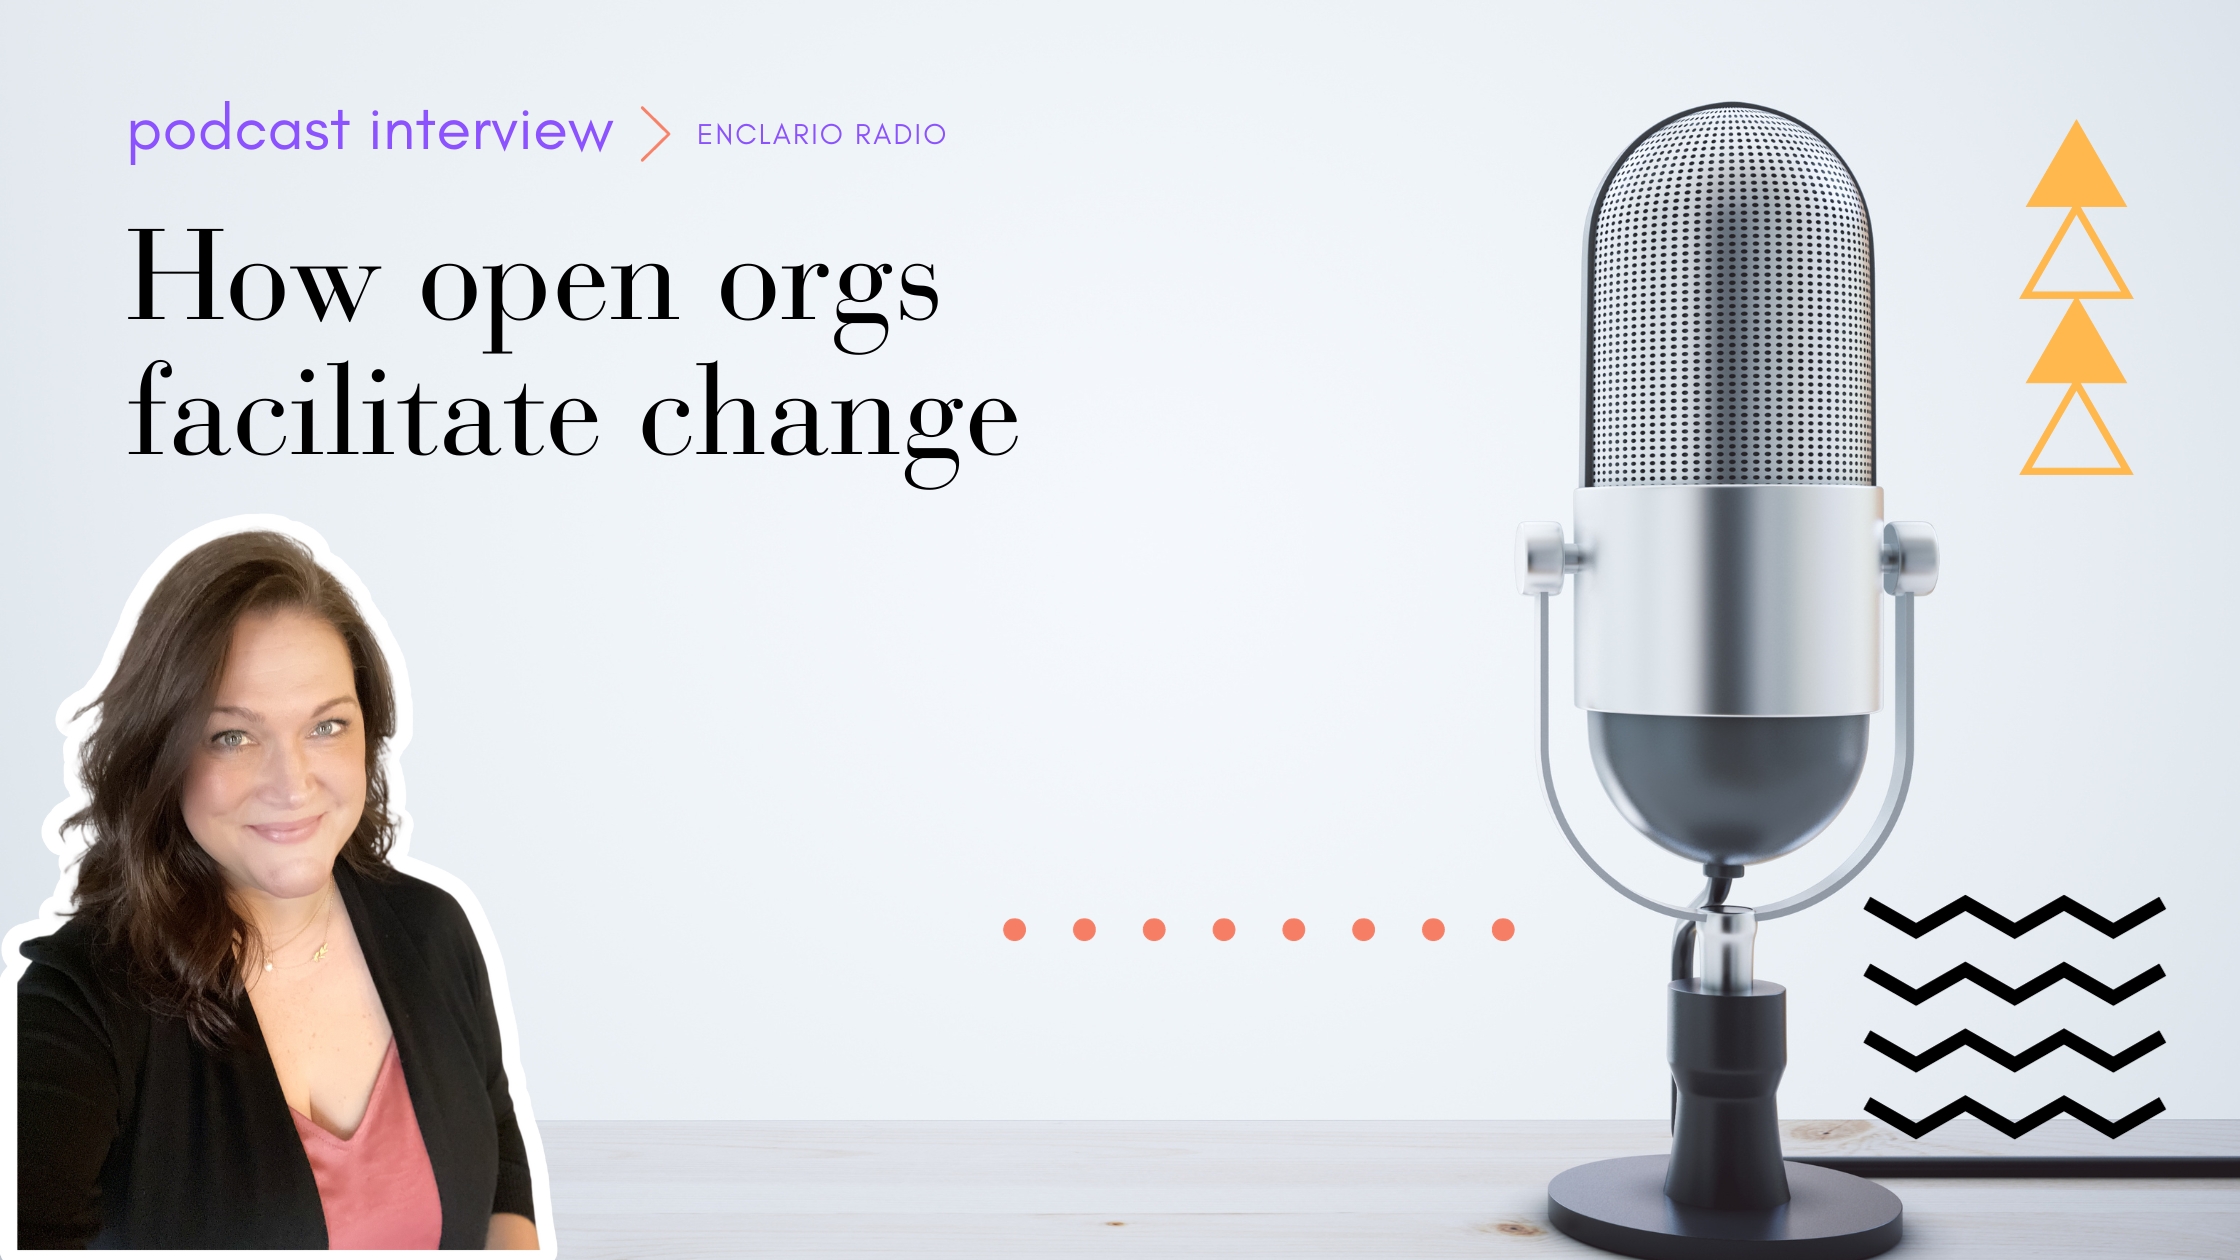 How Open Organizations Facilitate Change